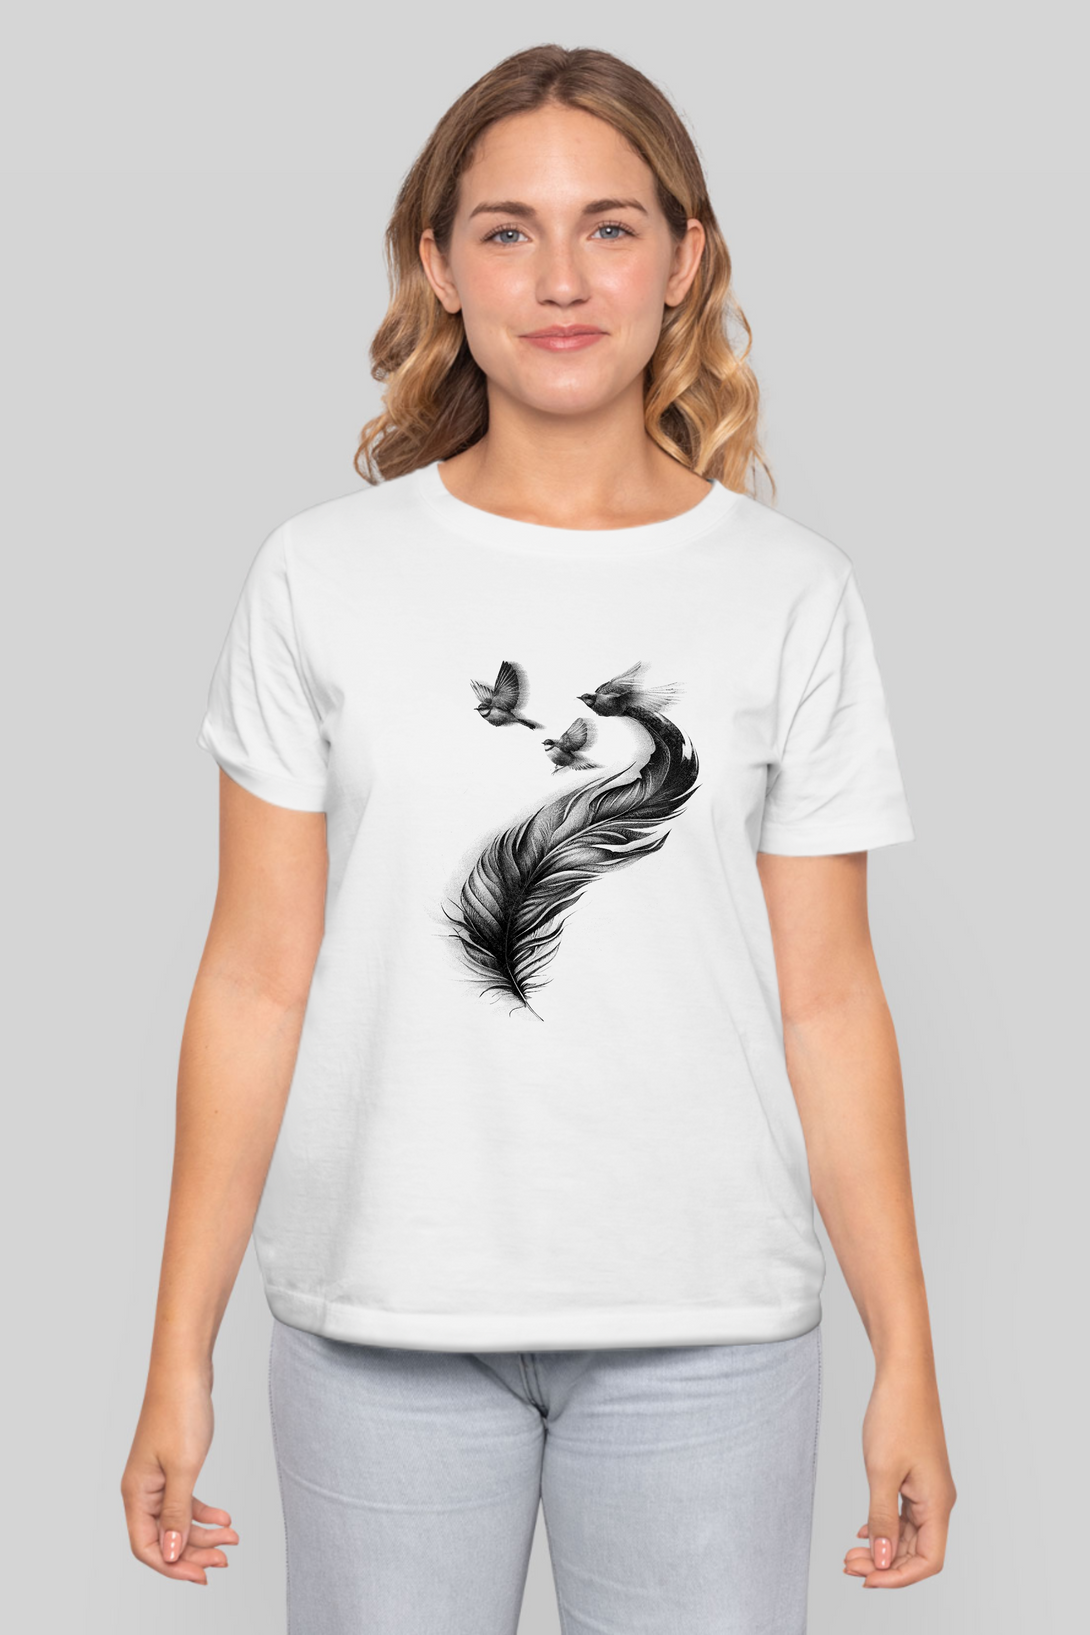 Feather With Birds Printed T-Shirt For Women - WowWaves - 8